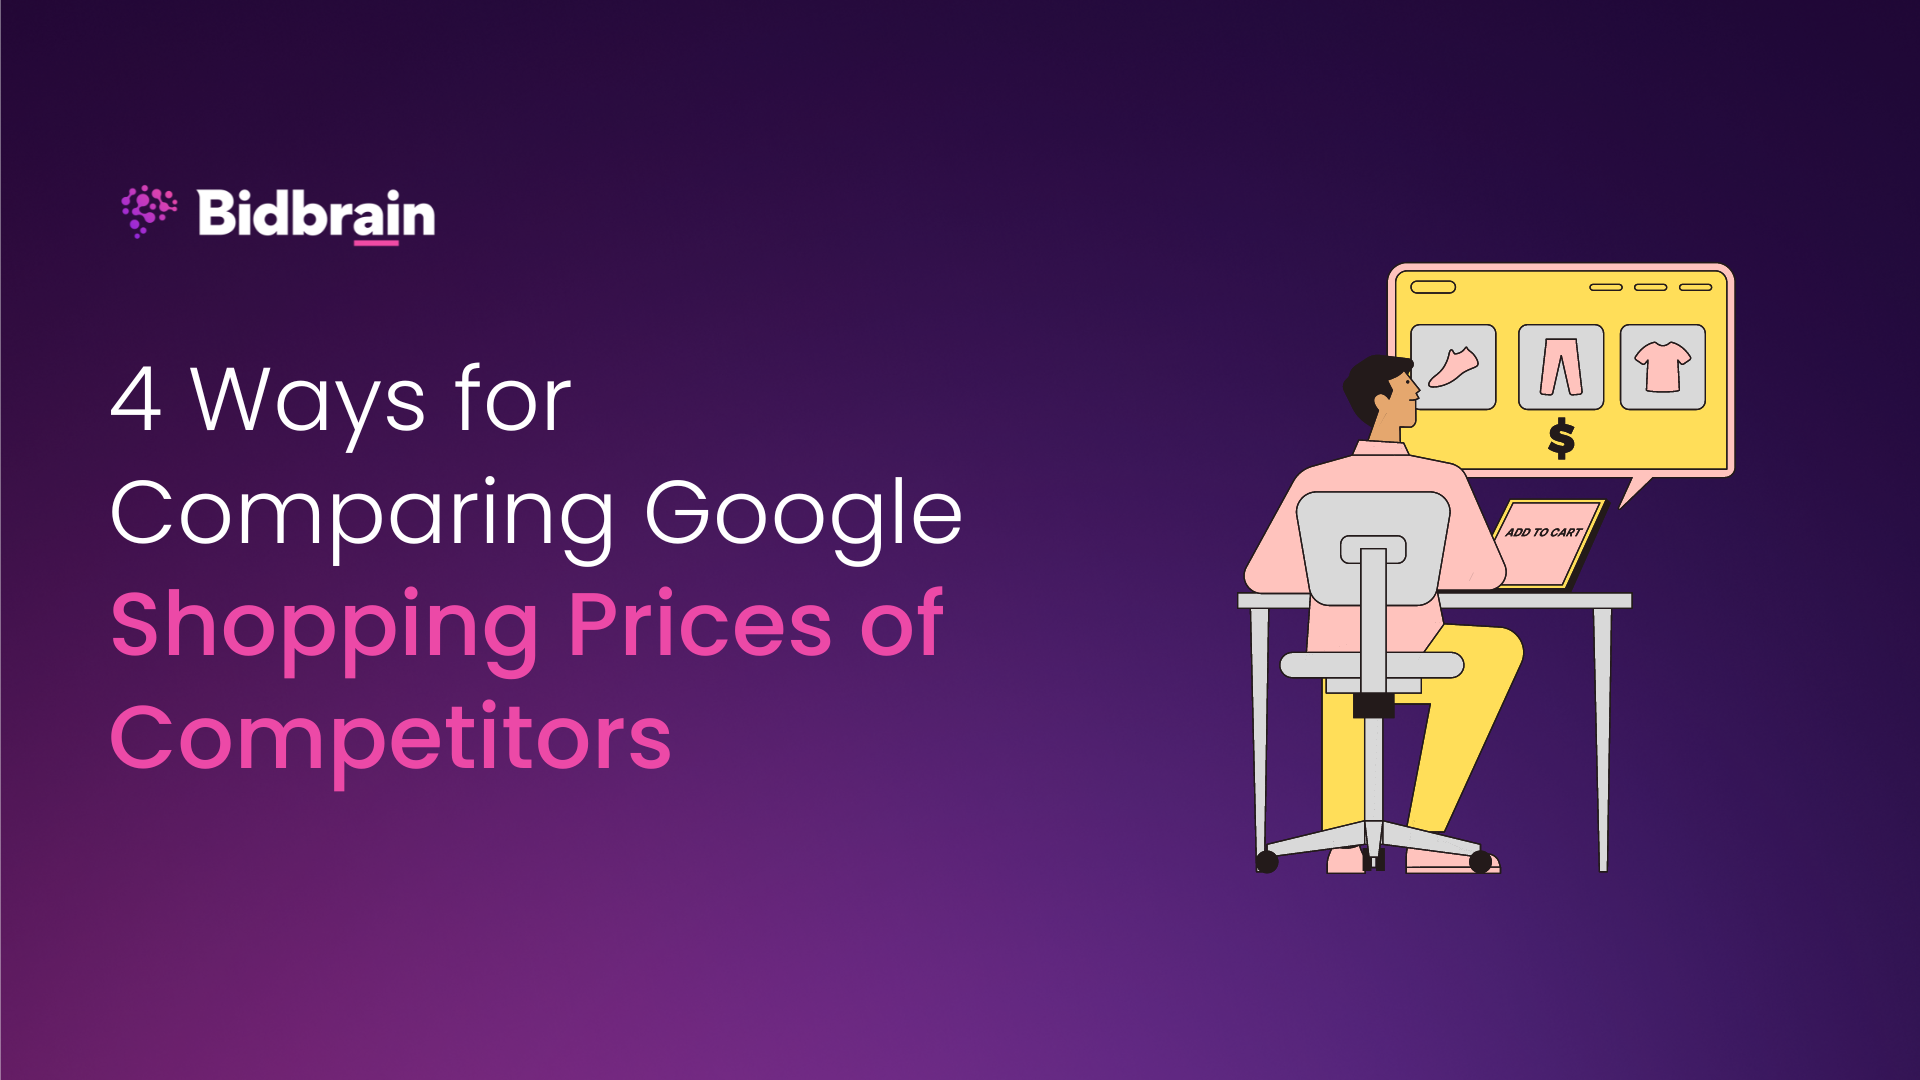 4 Ways for Comparing Google Shopping Prices of Competitors